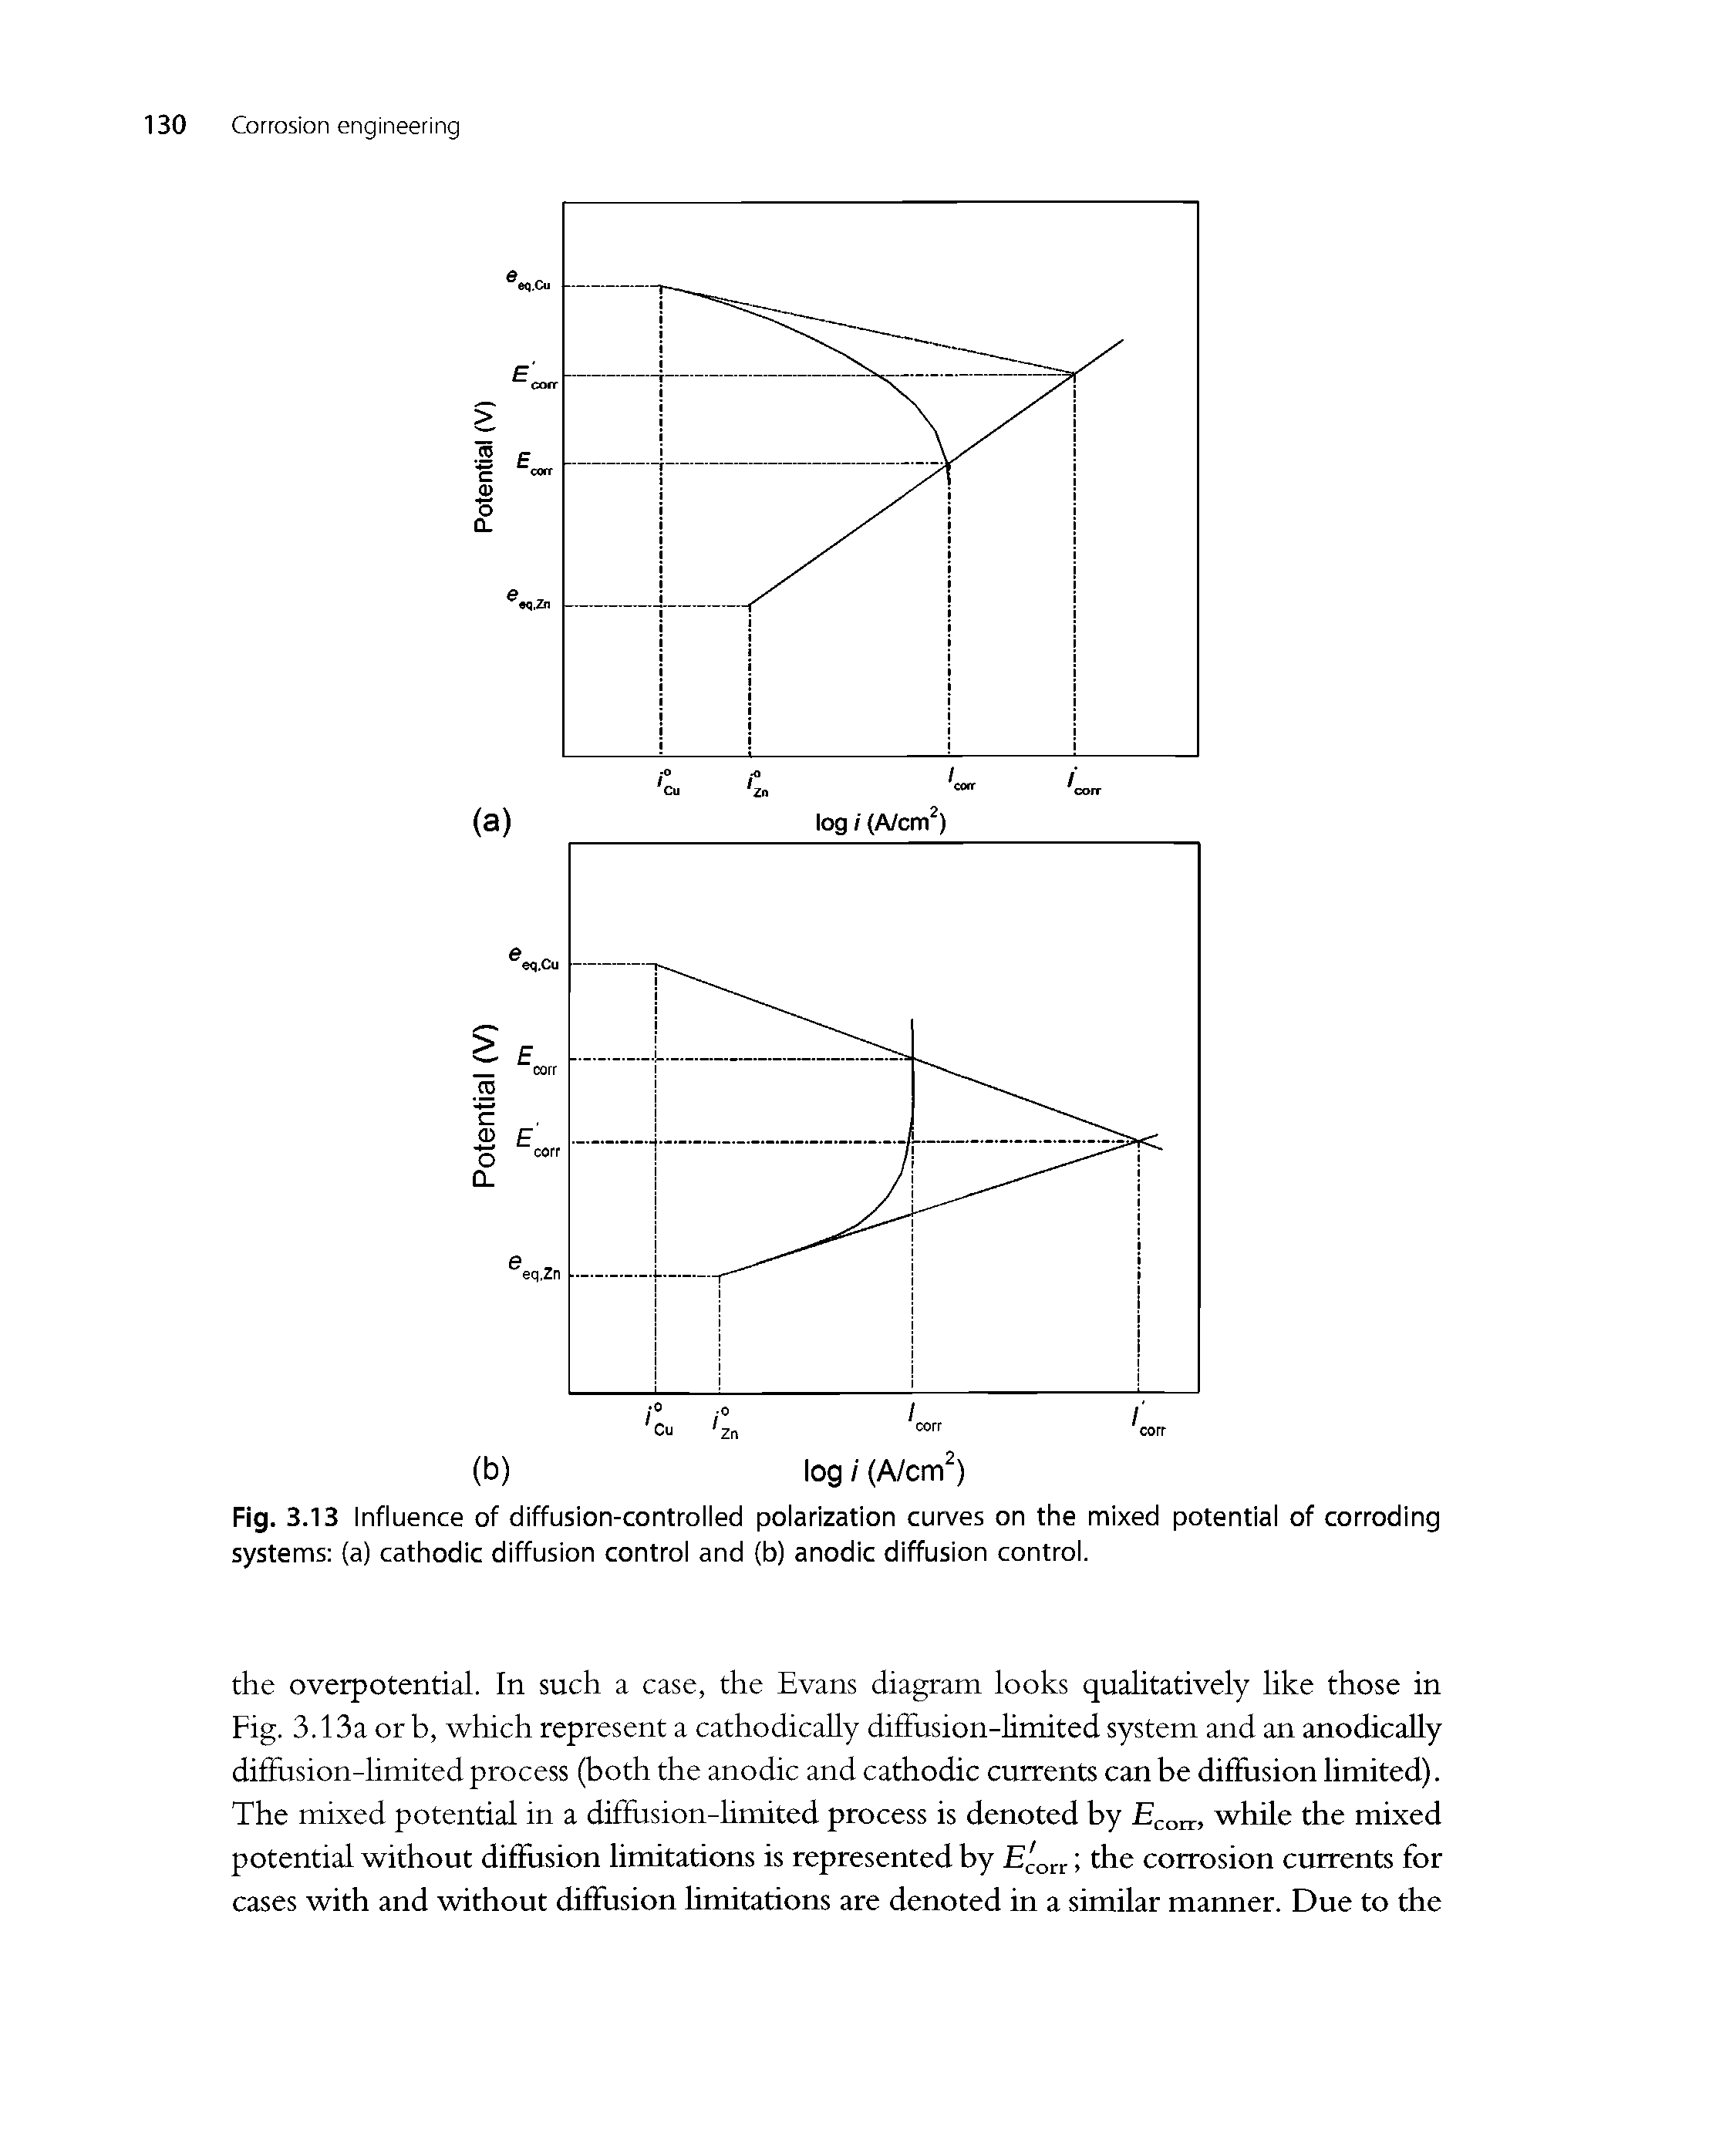 Fig. 3.13 Influence of diffusion-controlled polarization curves on the mixed potential of corroding systems (a) cathodic diffusion control and (b) anodic diffusion control.